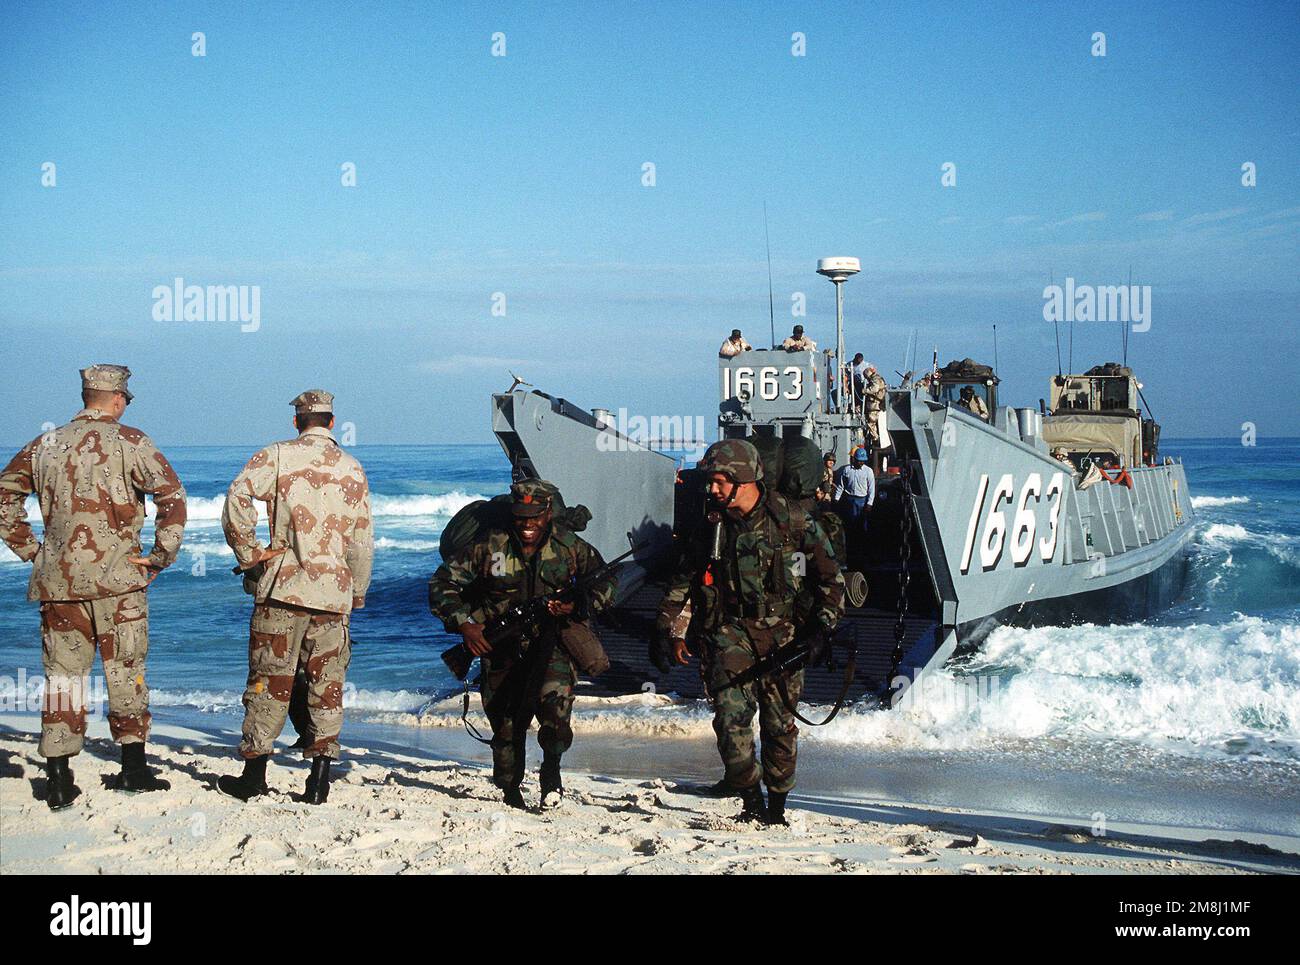 US Army members watch as US Navy Seabees from Amphibious Construction Battalion 2, Norfolk, Virginia, armed with M16 rifles and M60 machine guns, arrive on shore from a utility landing craft (LCU 1663) to a beach in Egypt during Exercise BRIGHT STAR '94. Subject Operation/Series: BRIGHT STAR '94 Country: Egypt (EGY) Stock Photo